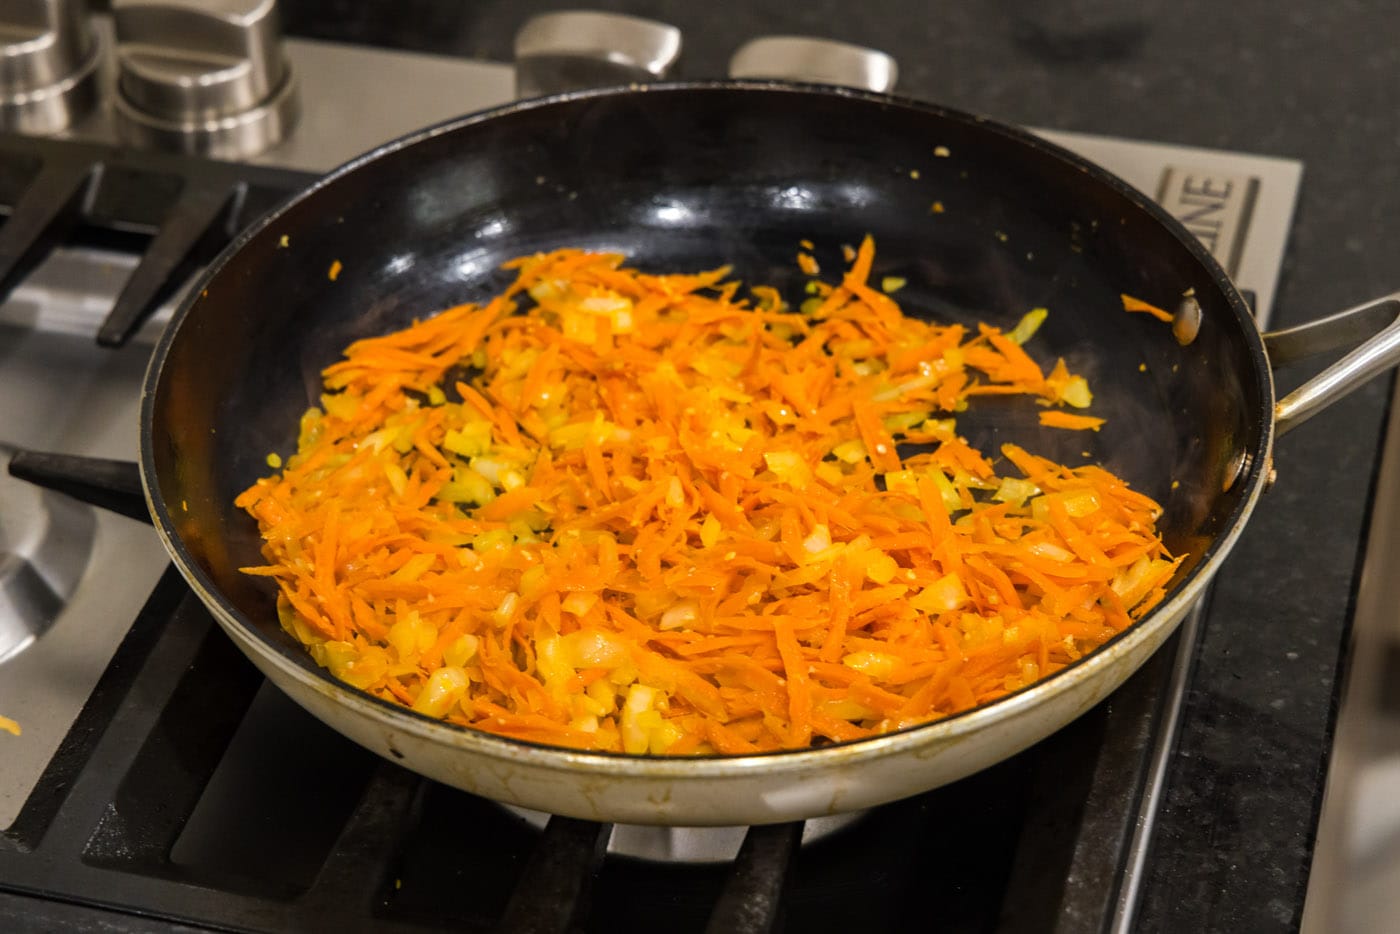 cooking garlic, onion, and shredded carrots in a skillet